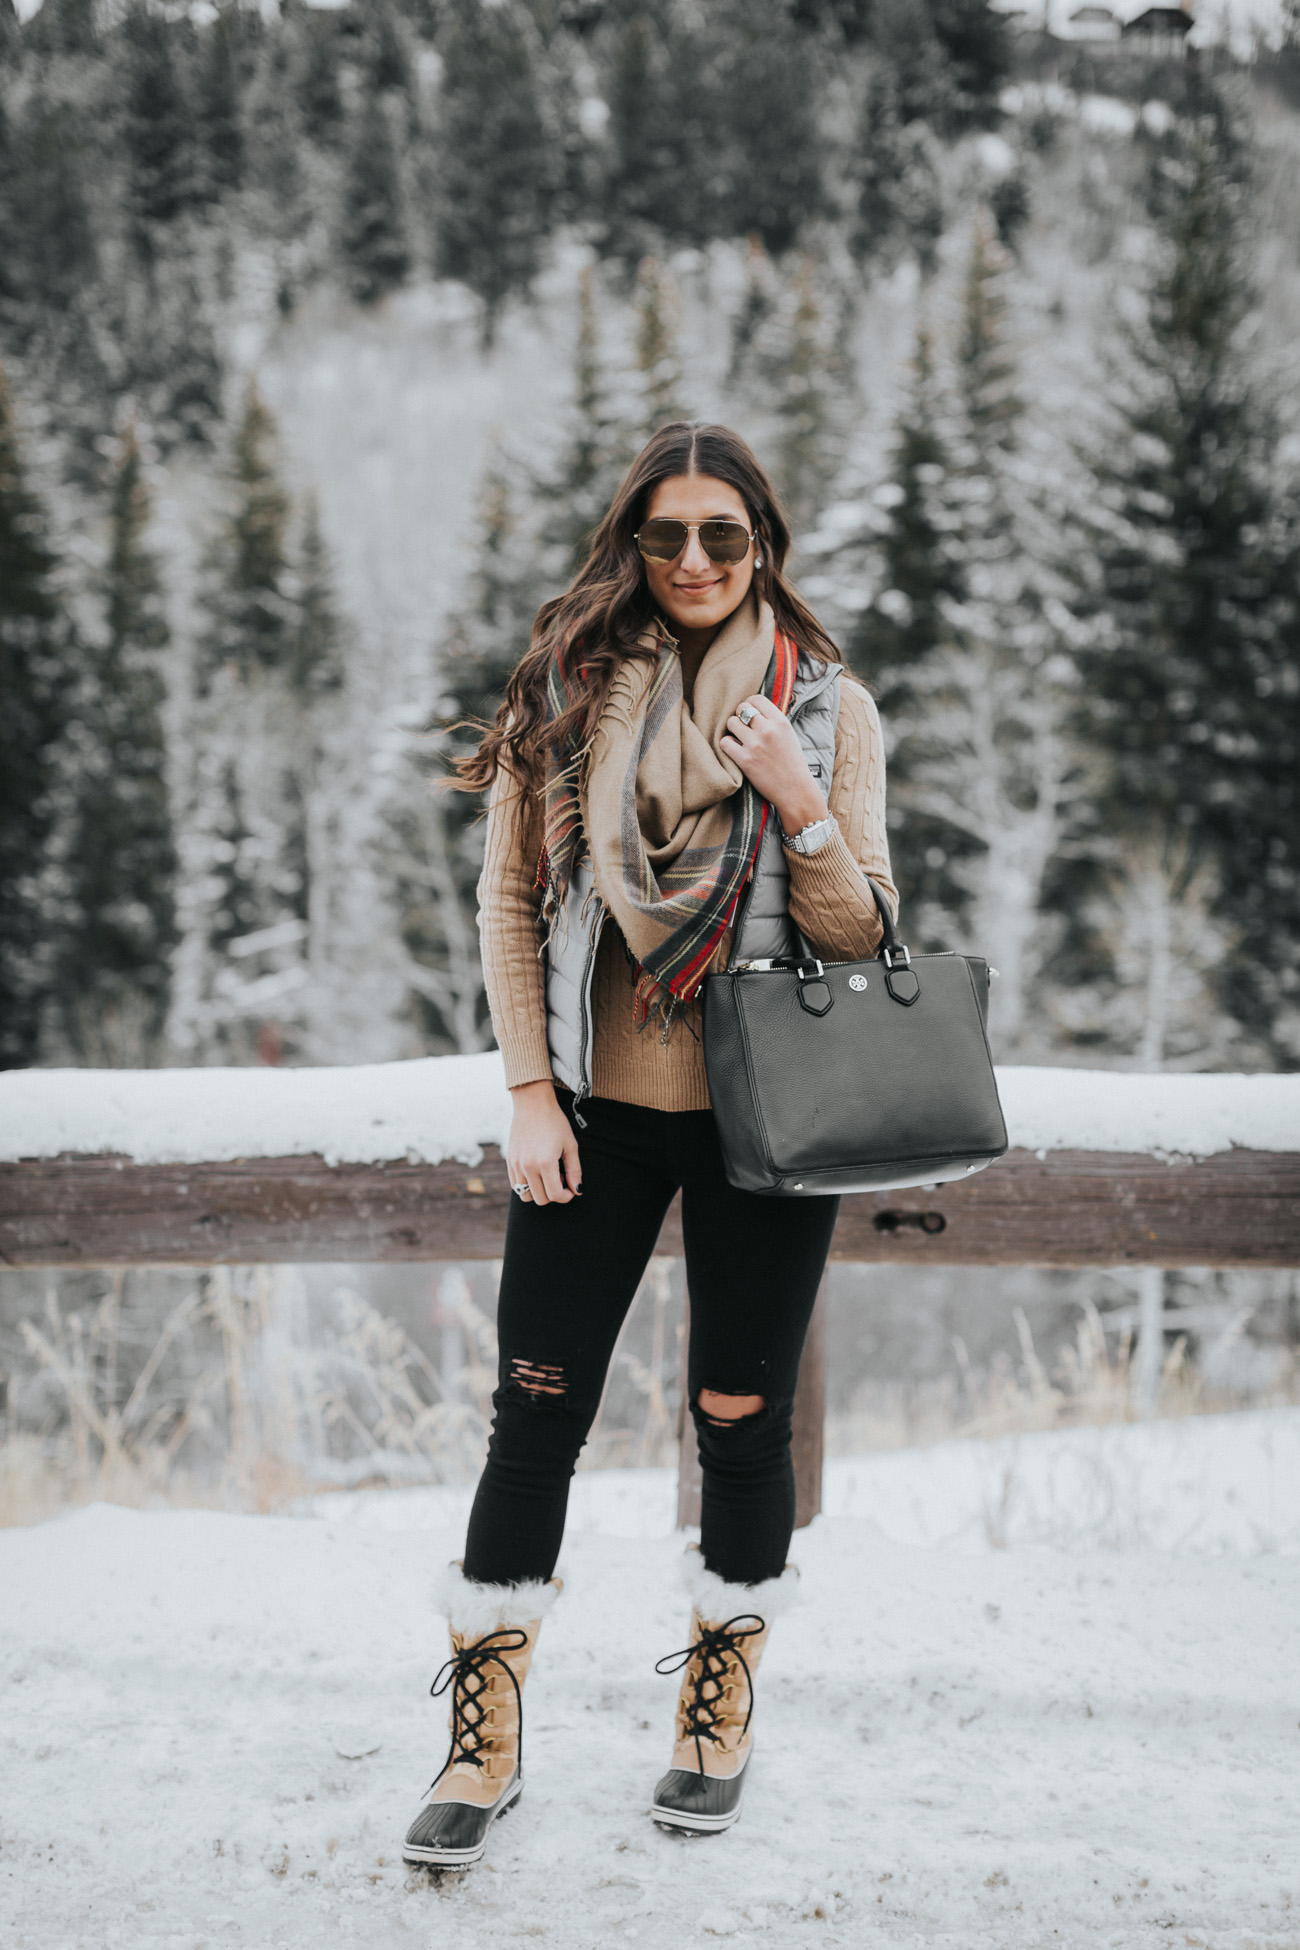 Chic Winter Outfit | A Southern Drawl